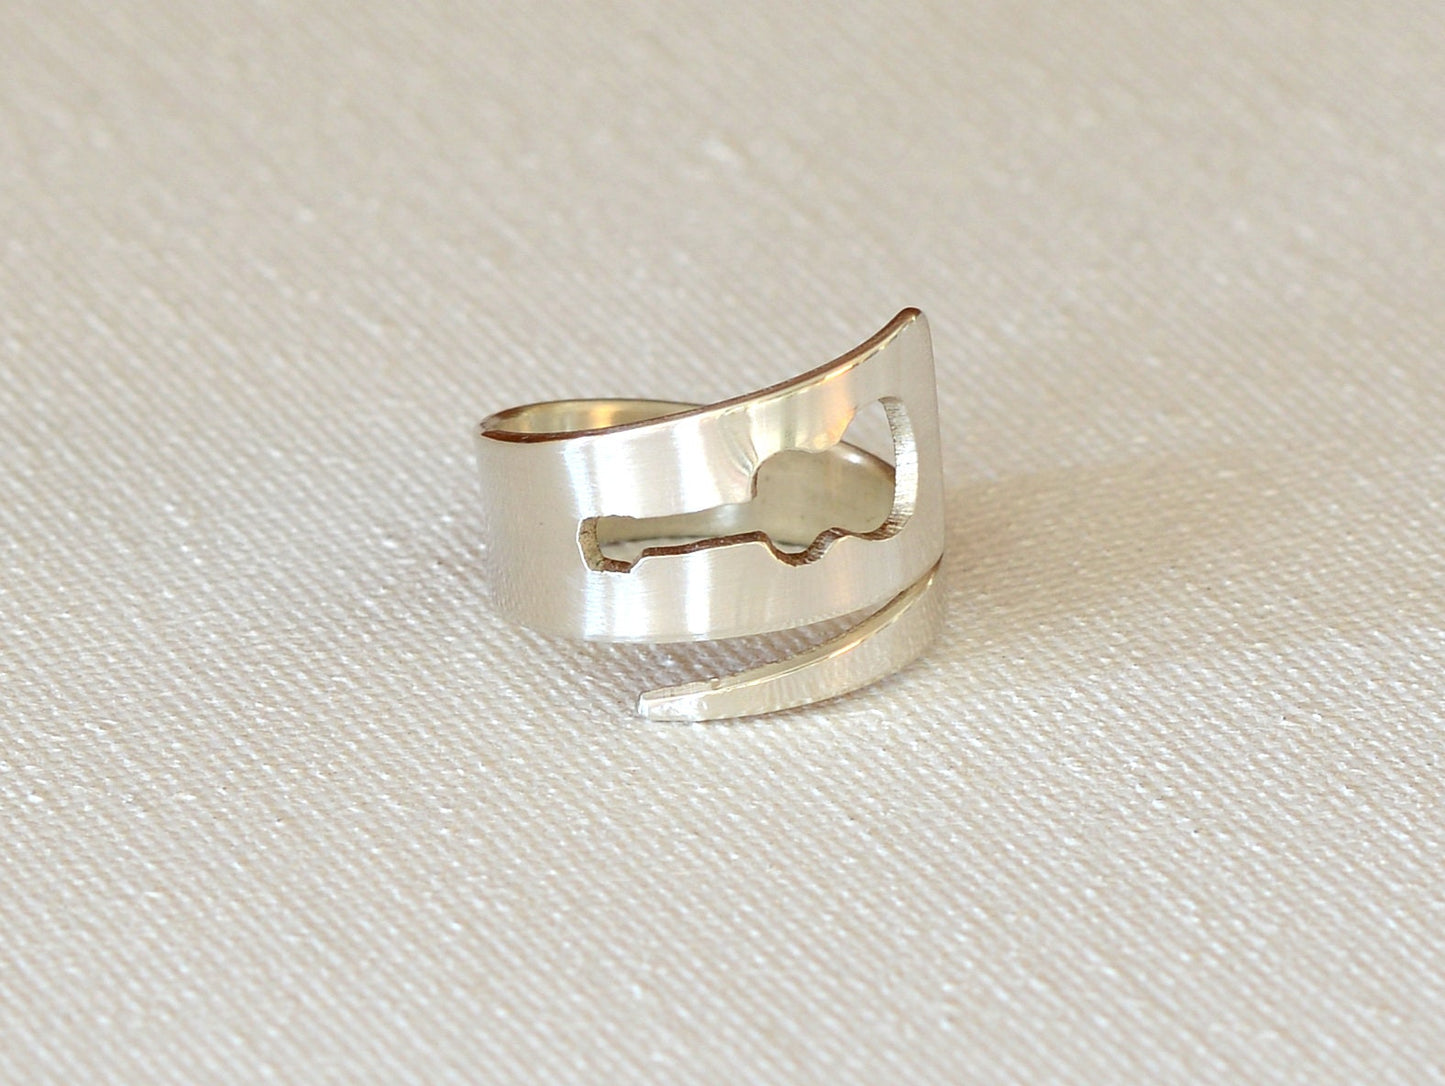 Guitar sterling silver adjustable bypass style wrap ring